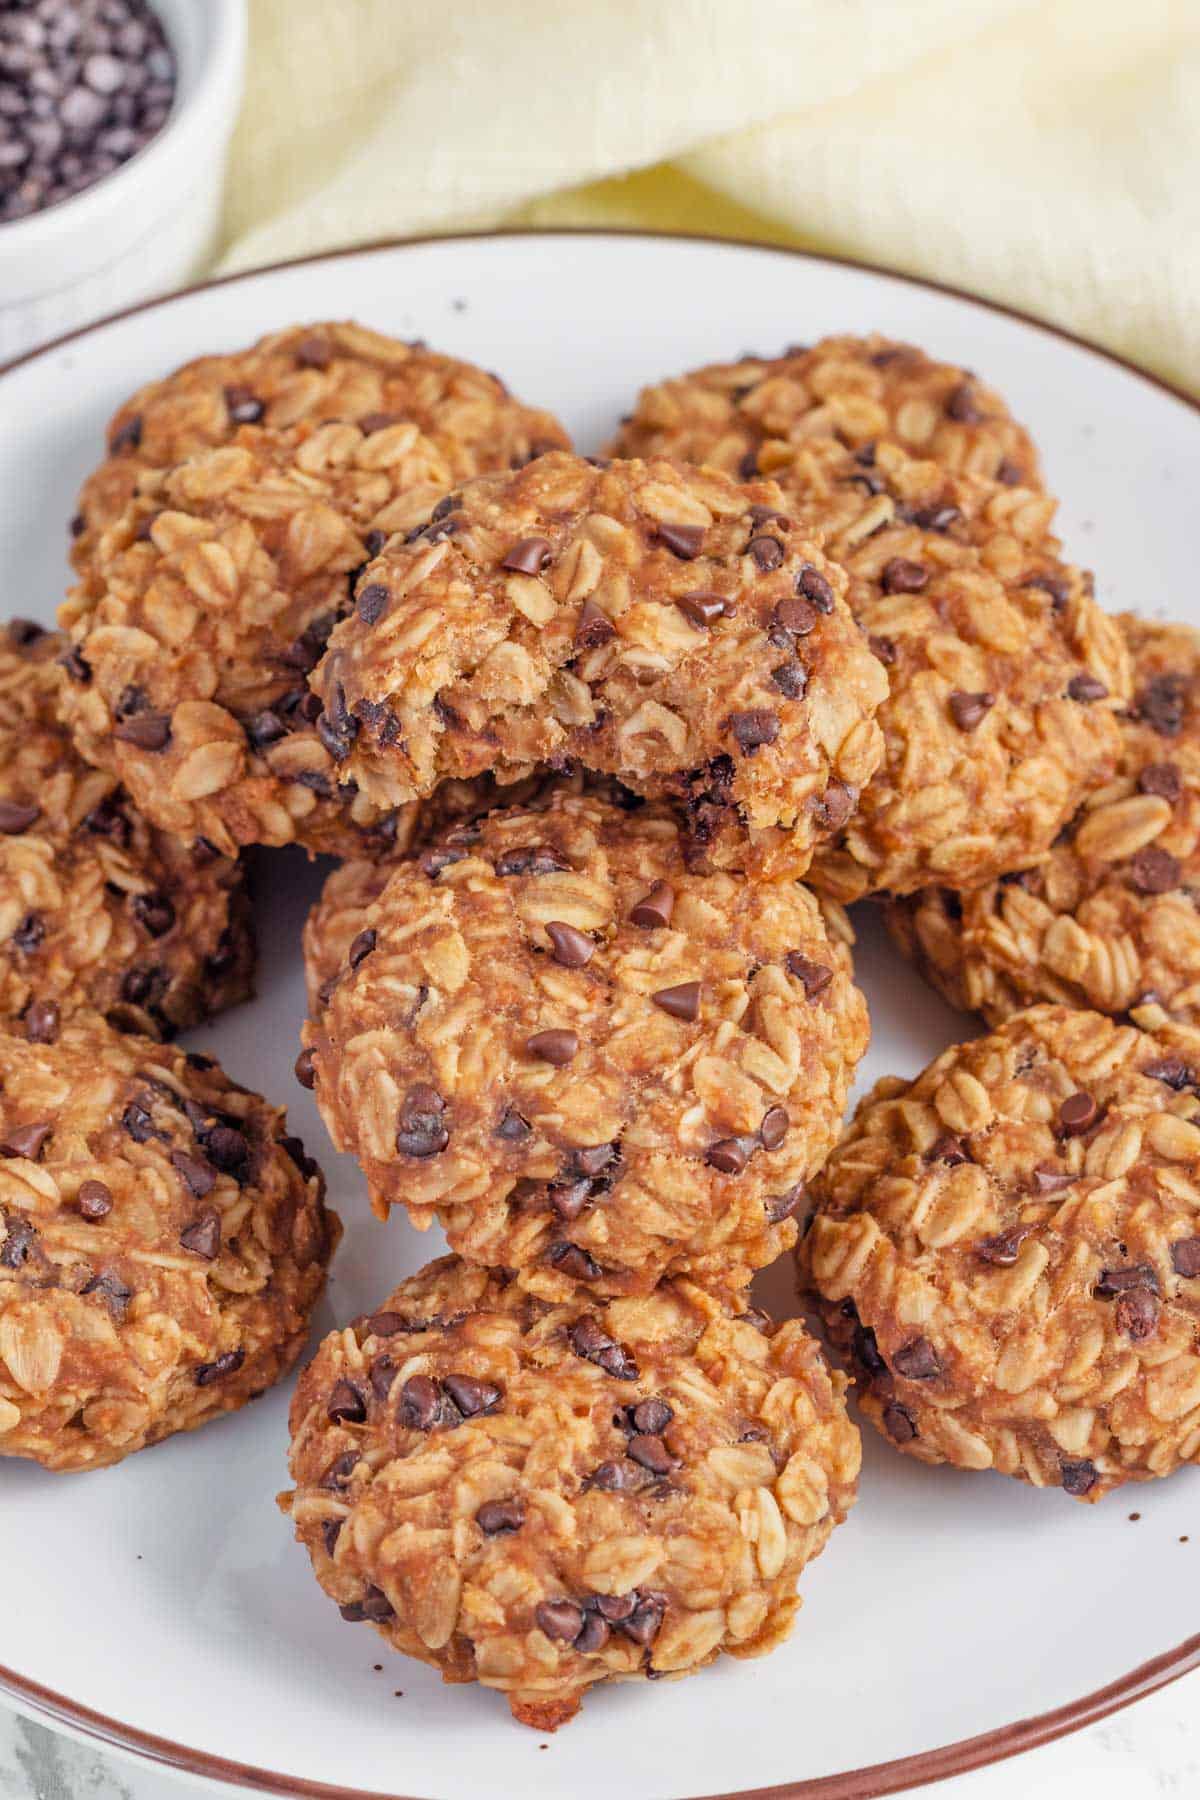 a stack of sugar free oatmeal cookies on a plate